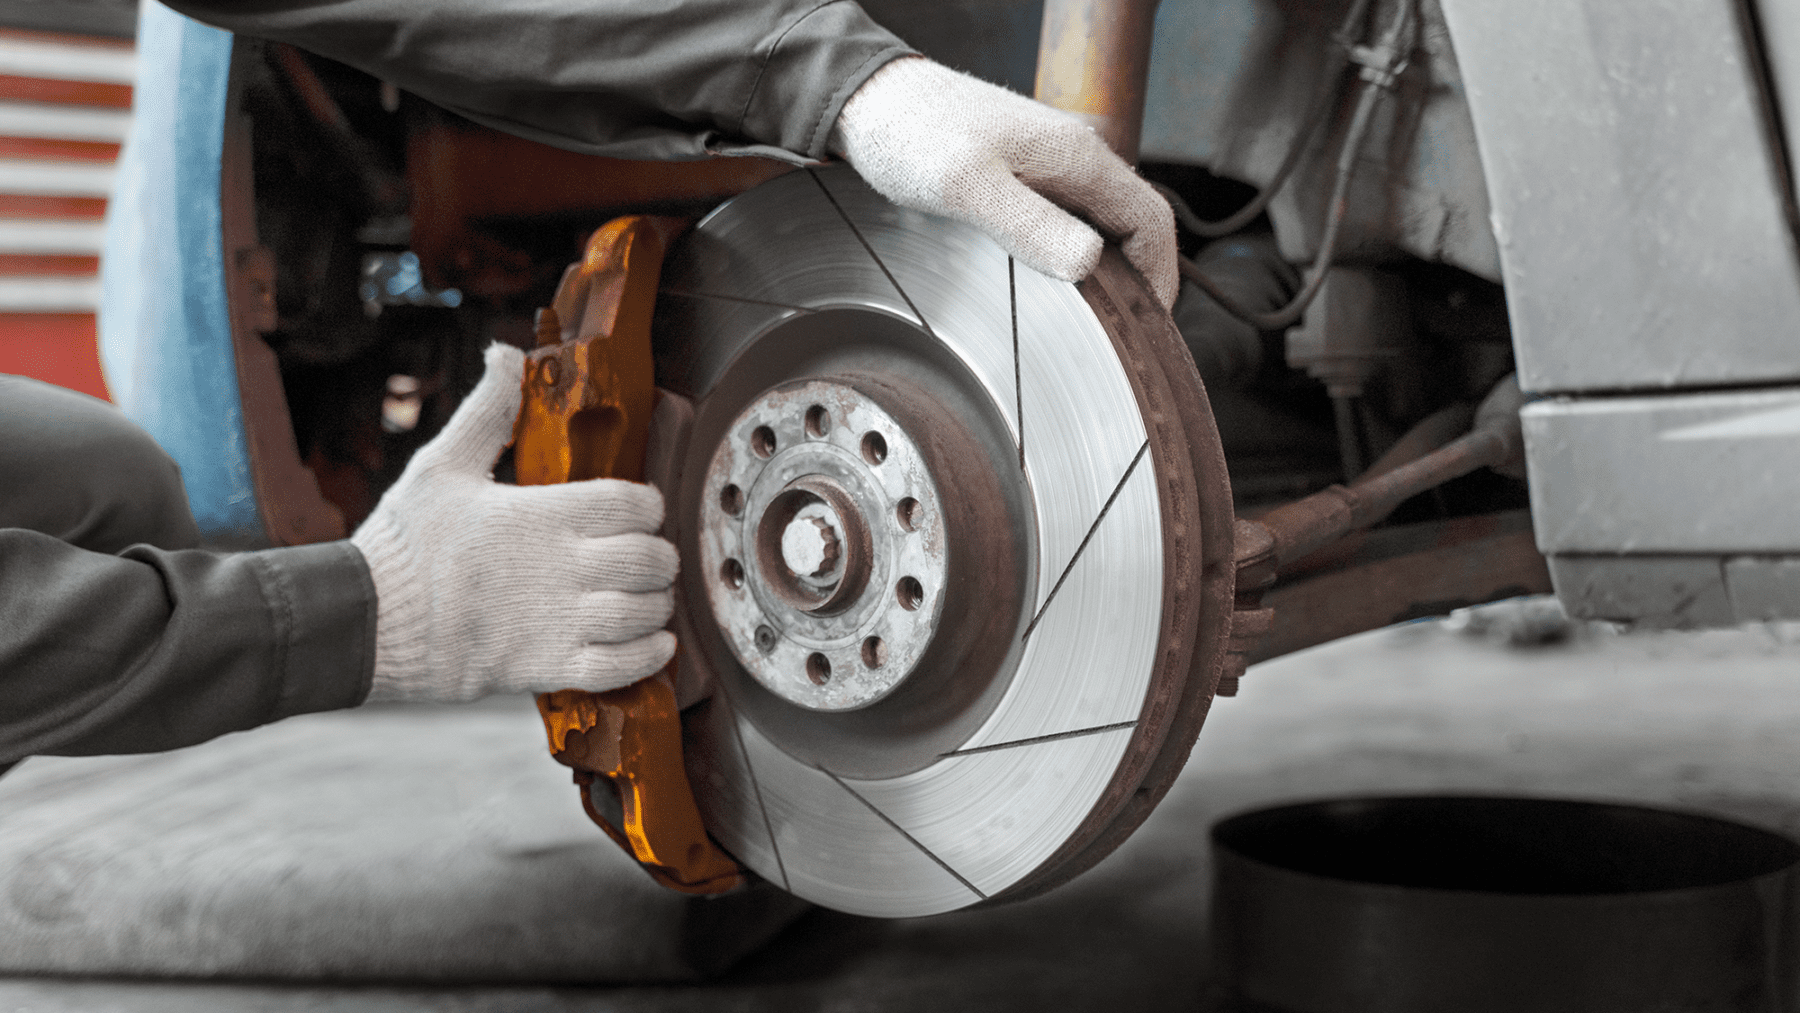 6 Ways To Extend The Life Of Your Brake Pads/Brake Shoes